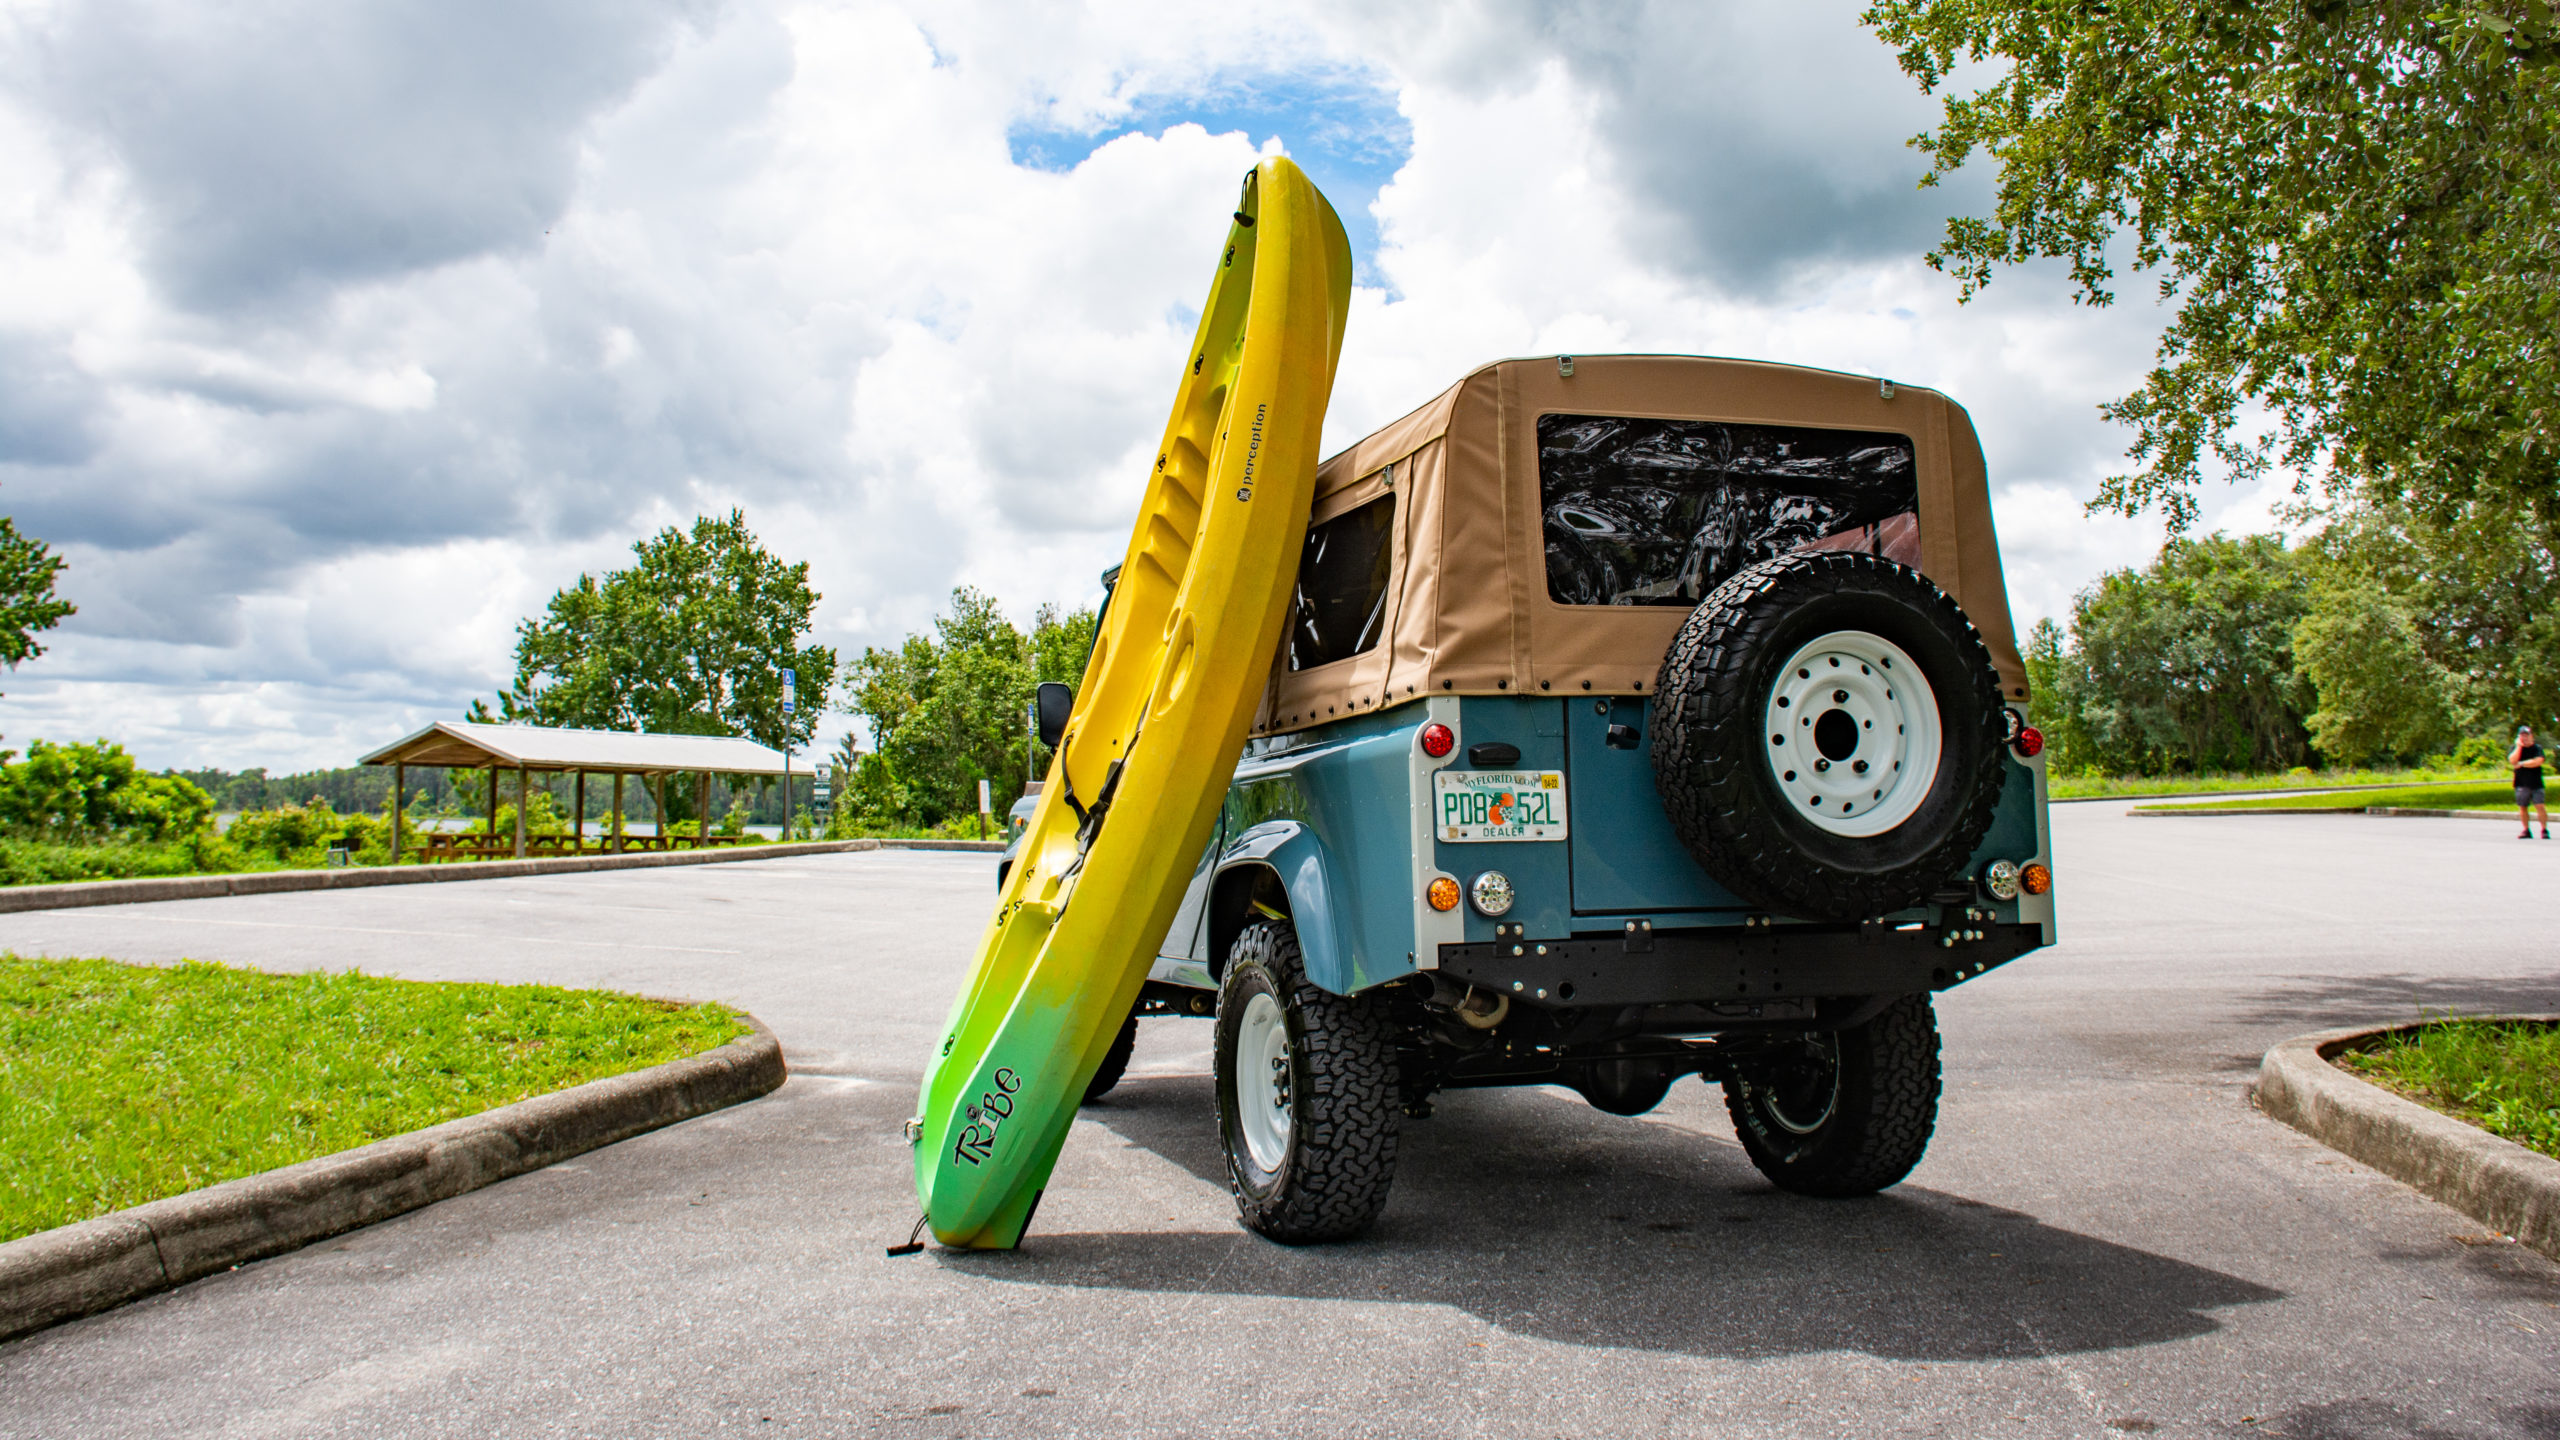 New Soft-Top D110s from E.C.D. Automotive Design Tailored for Outdoor Lifestyles | THE SHOP